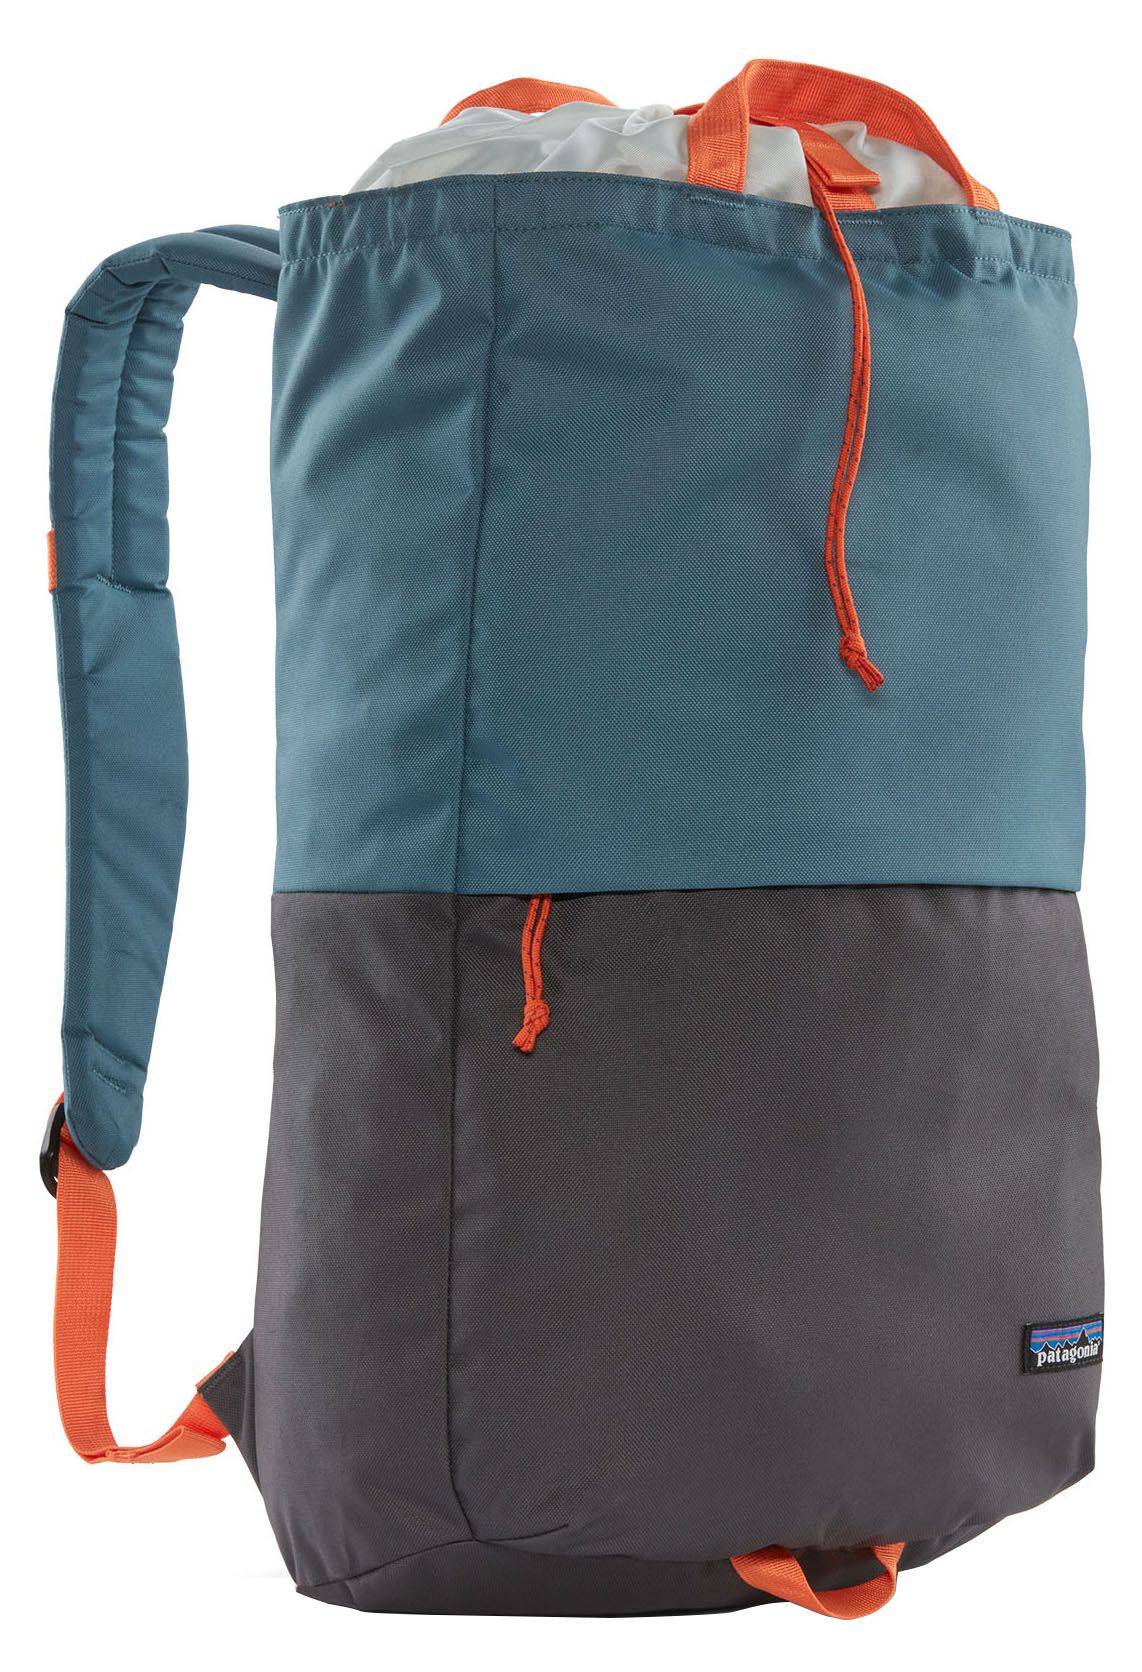 Photos - Backpack Patagonia Fieldsmith Linked 25L Pack, Men's, Patchwork Abalone Blue 23PTGA 